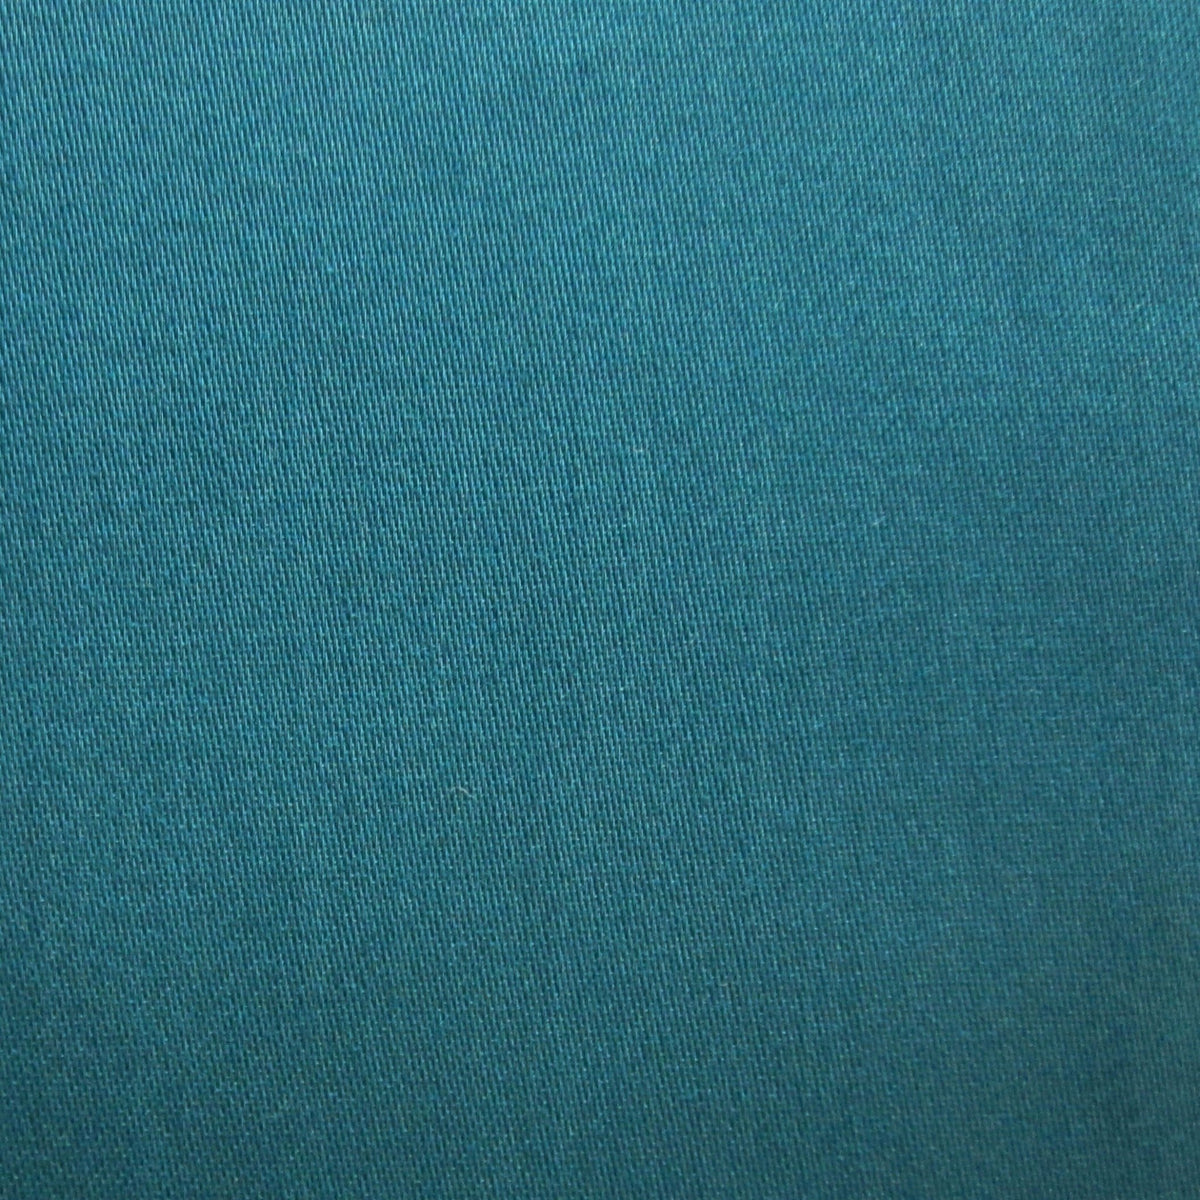 Home Treasures Royal Sateen Bedding Swatch Teal Fine Linens